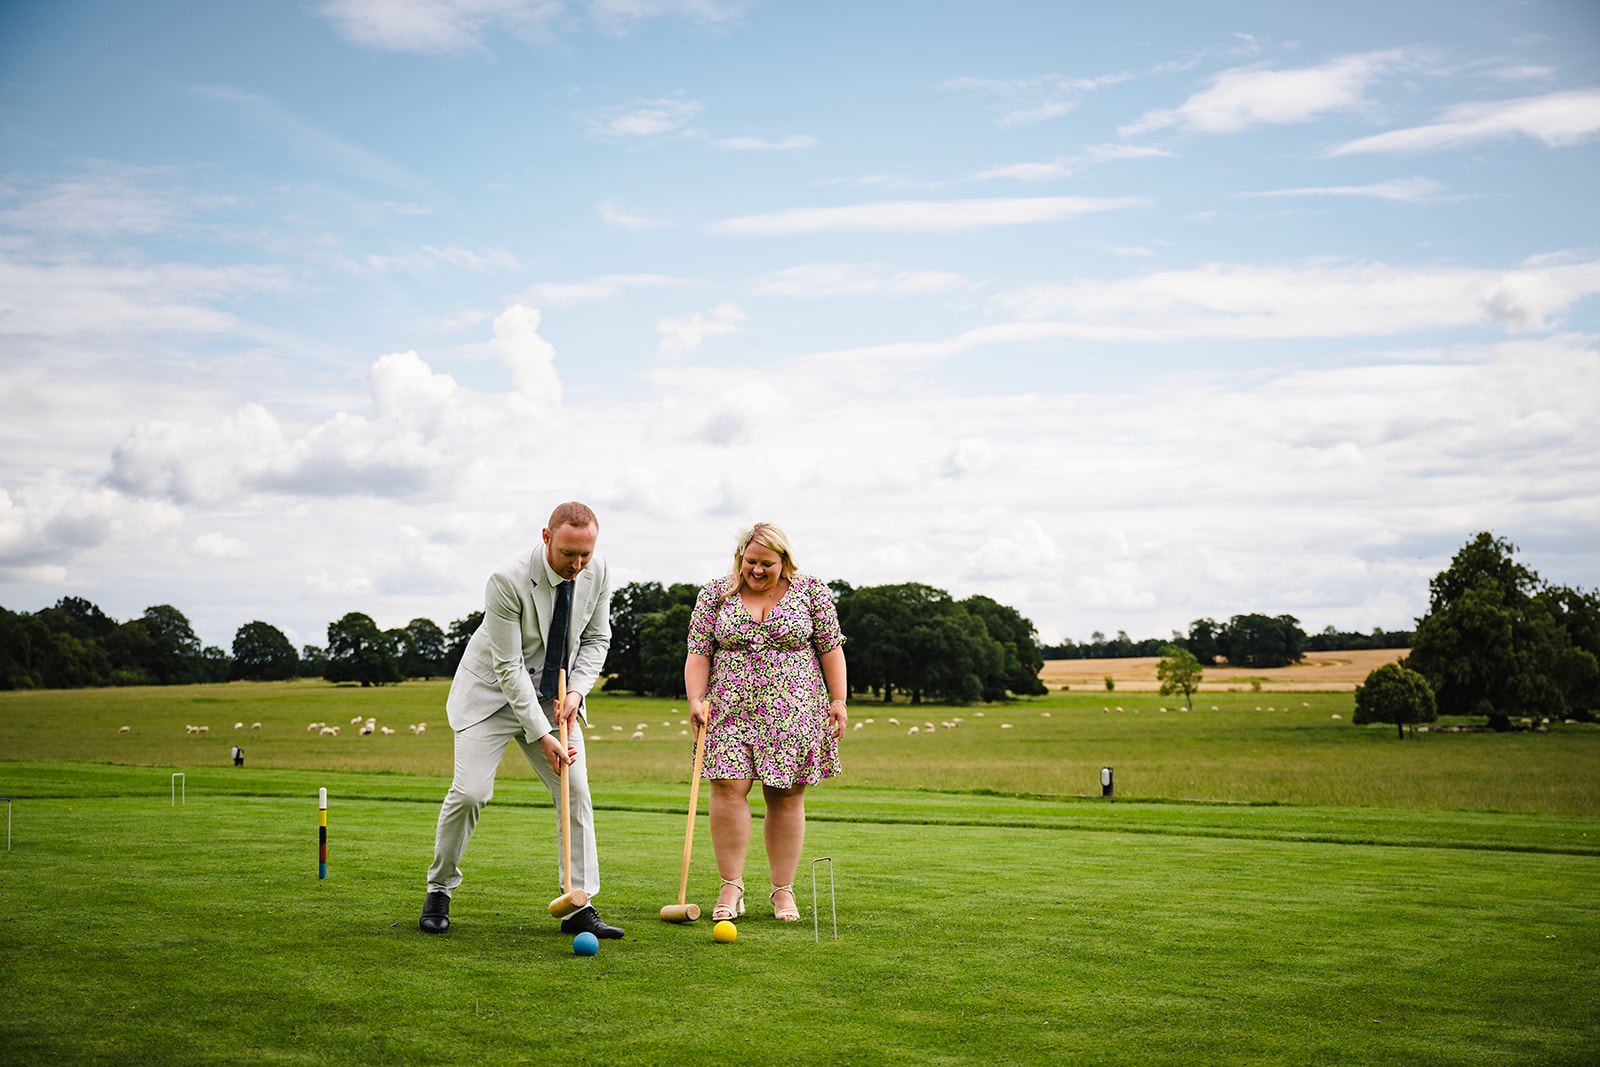 Couple playing garden games during stapleford park wedding reception by Amanda Forman Photography